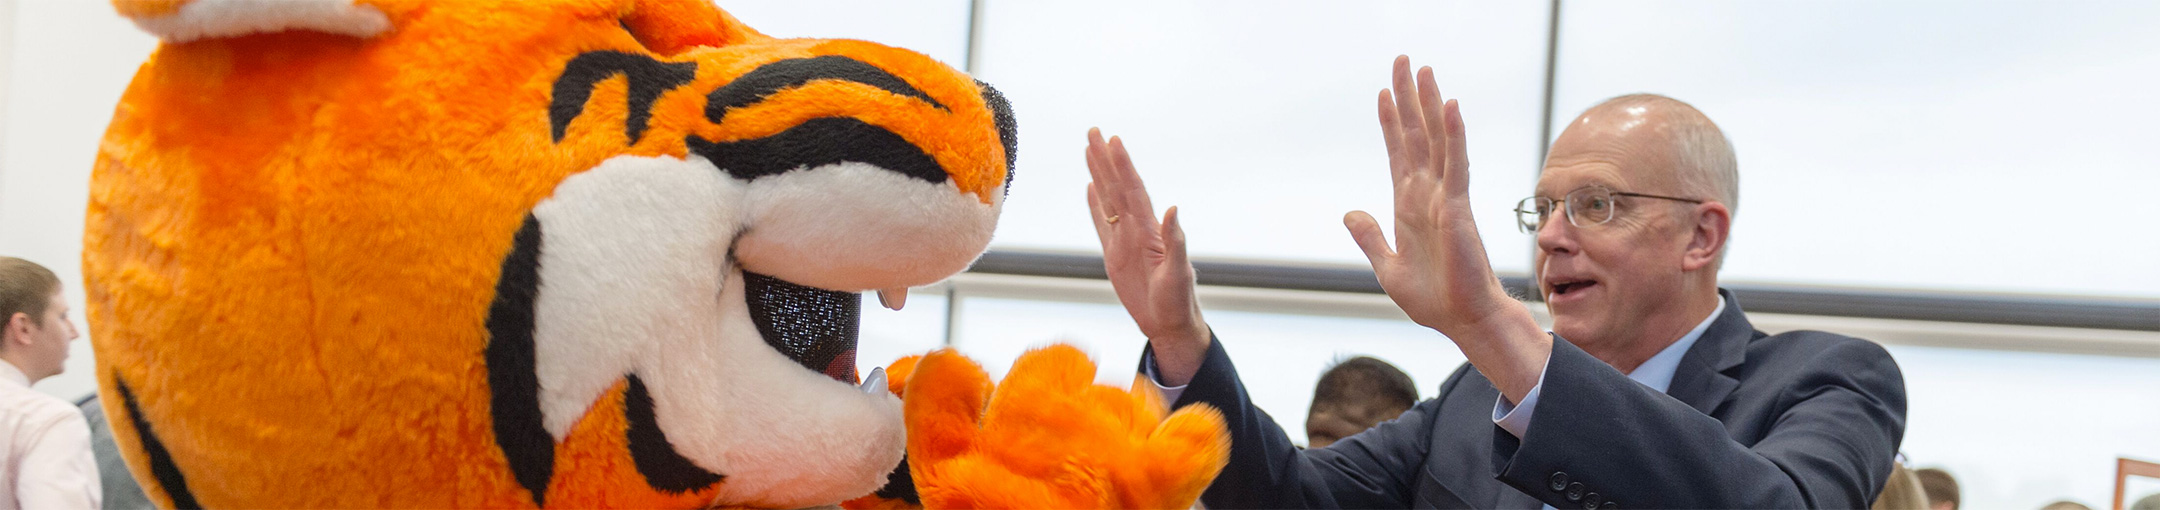 President Munson giving Ritchie the Tiger a high five